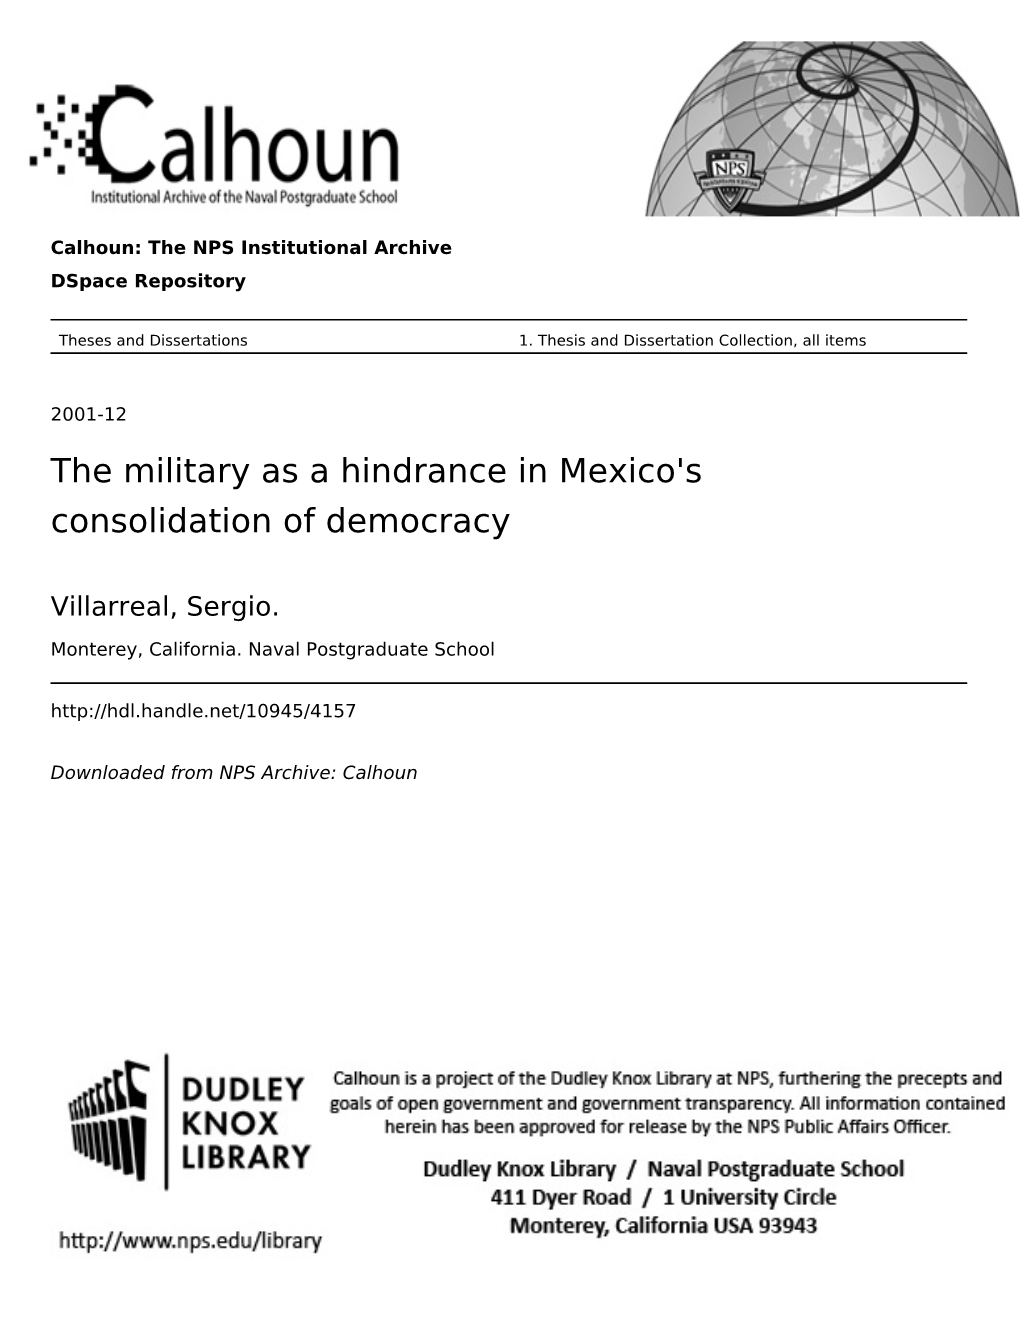 The Military As a Hindrance in Mexico's Consolidation of Democracy